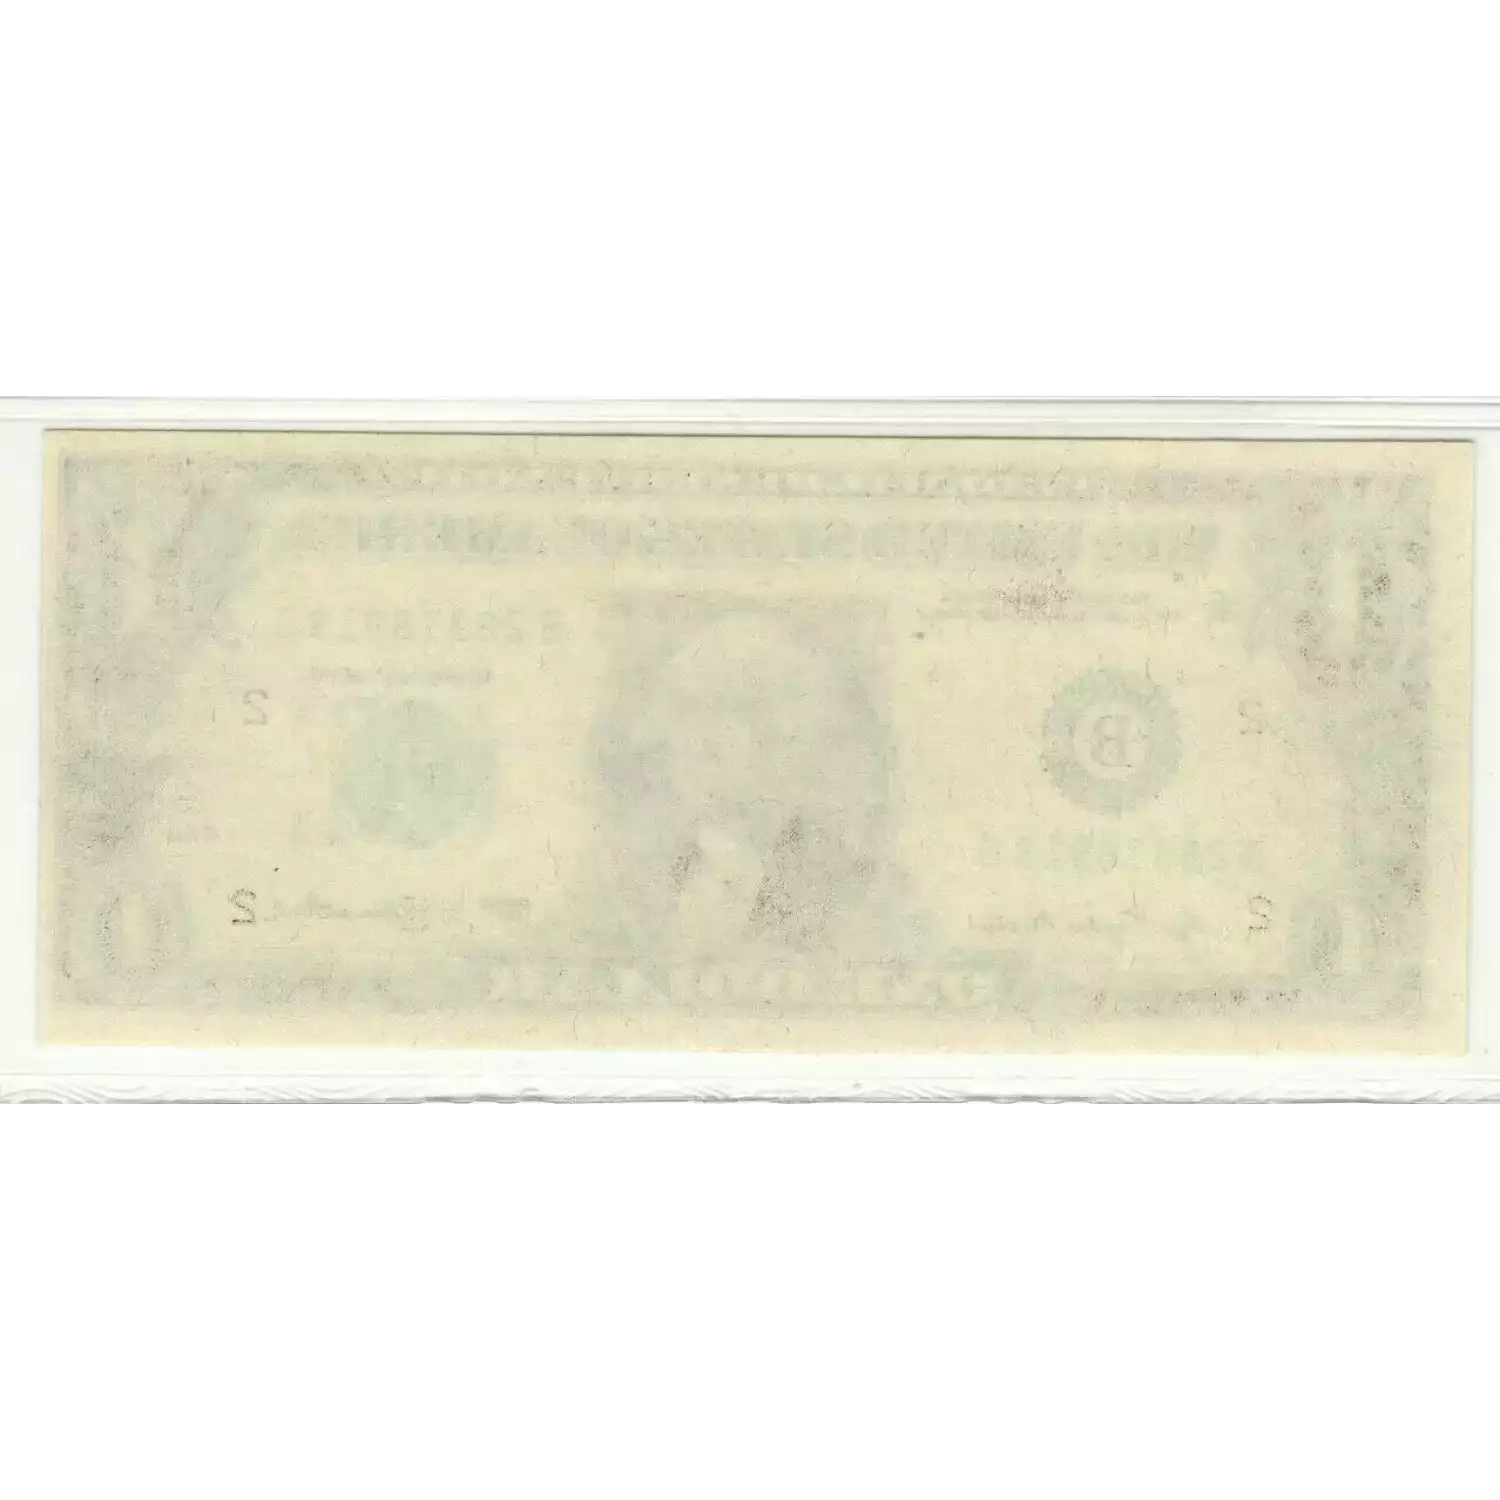 $1 1977 Green seal. Small Size $1 Federal Reserve Notes 1909-B (3)